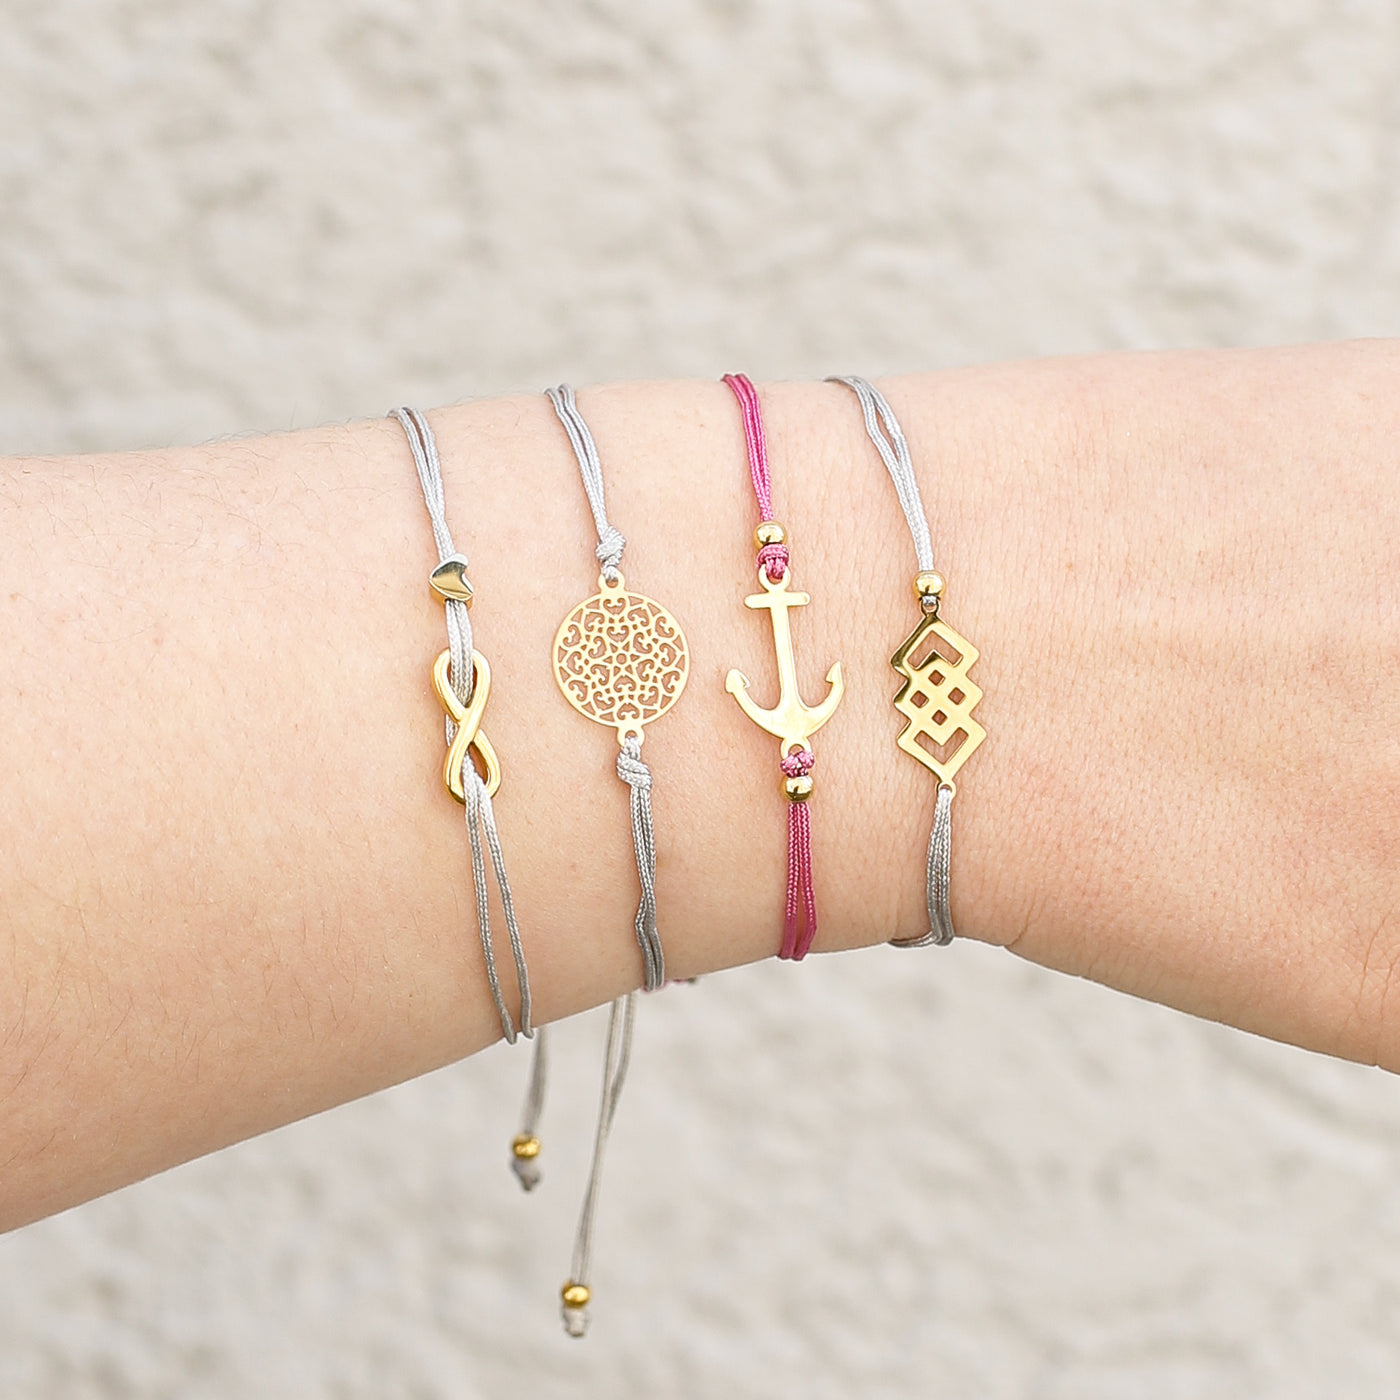 Bracelet with triangle pendant and Happiness greeting card